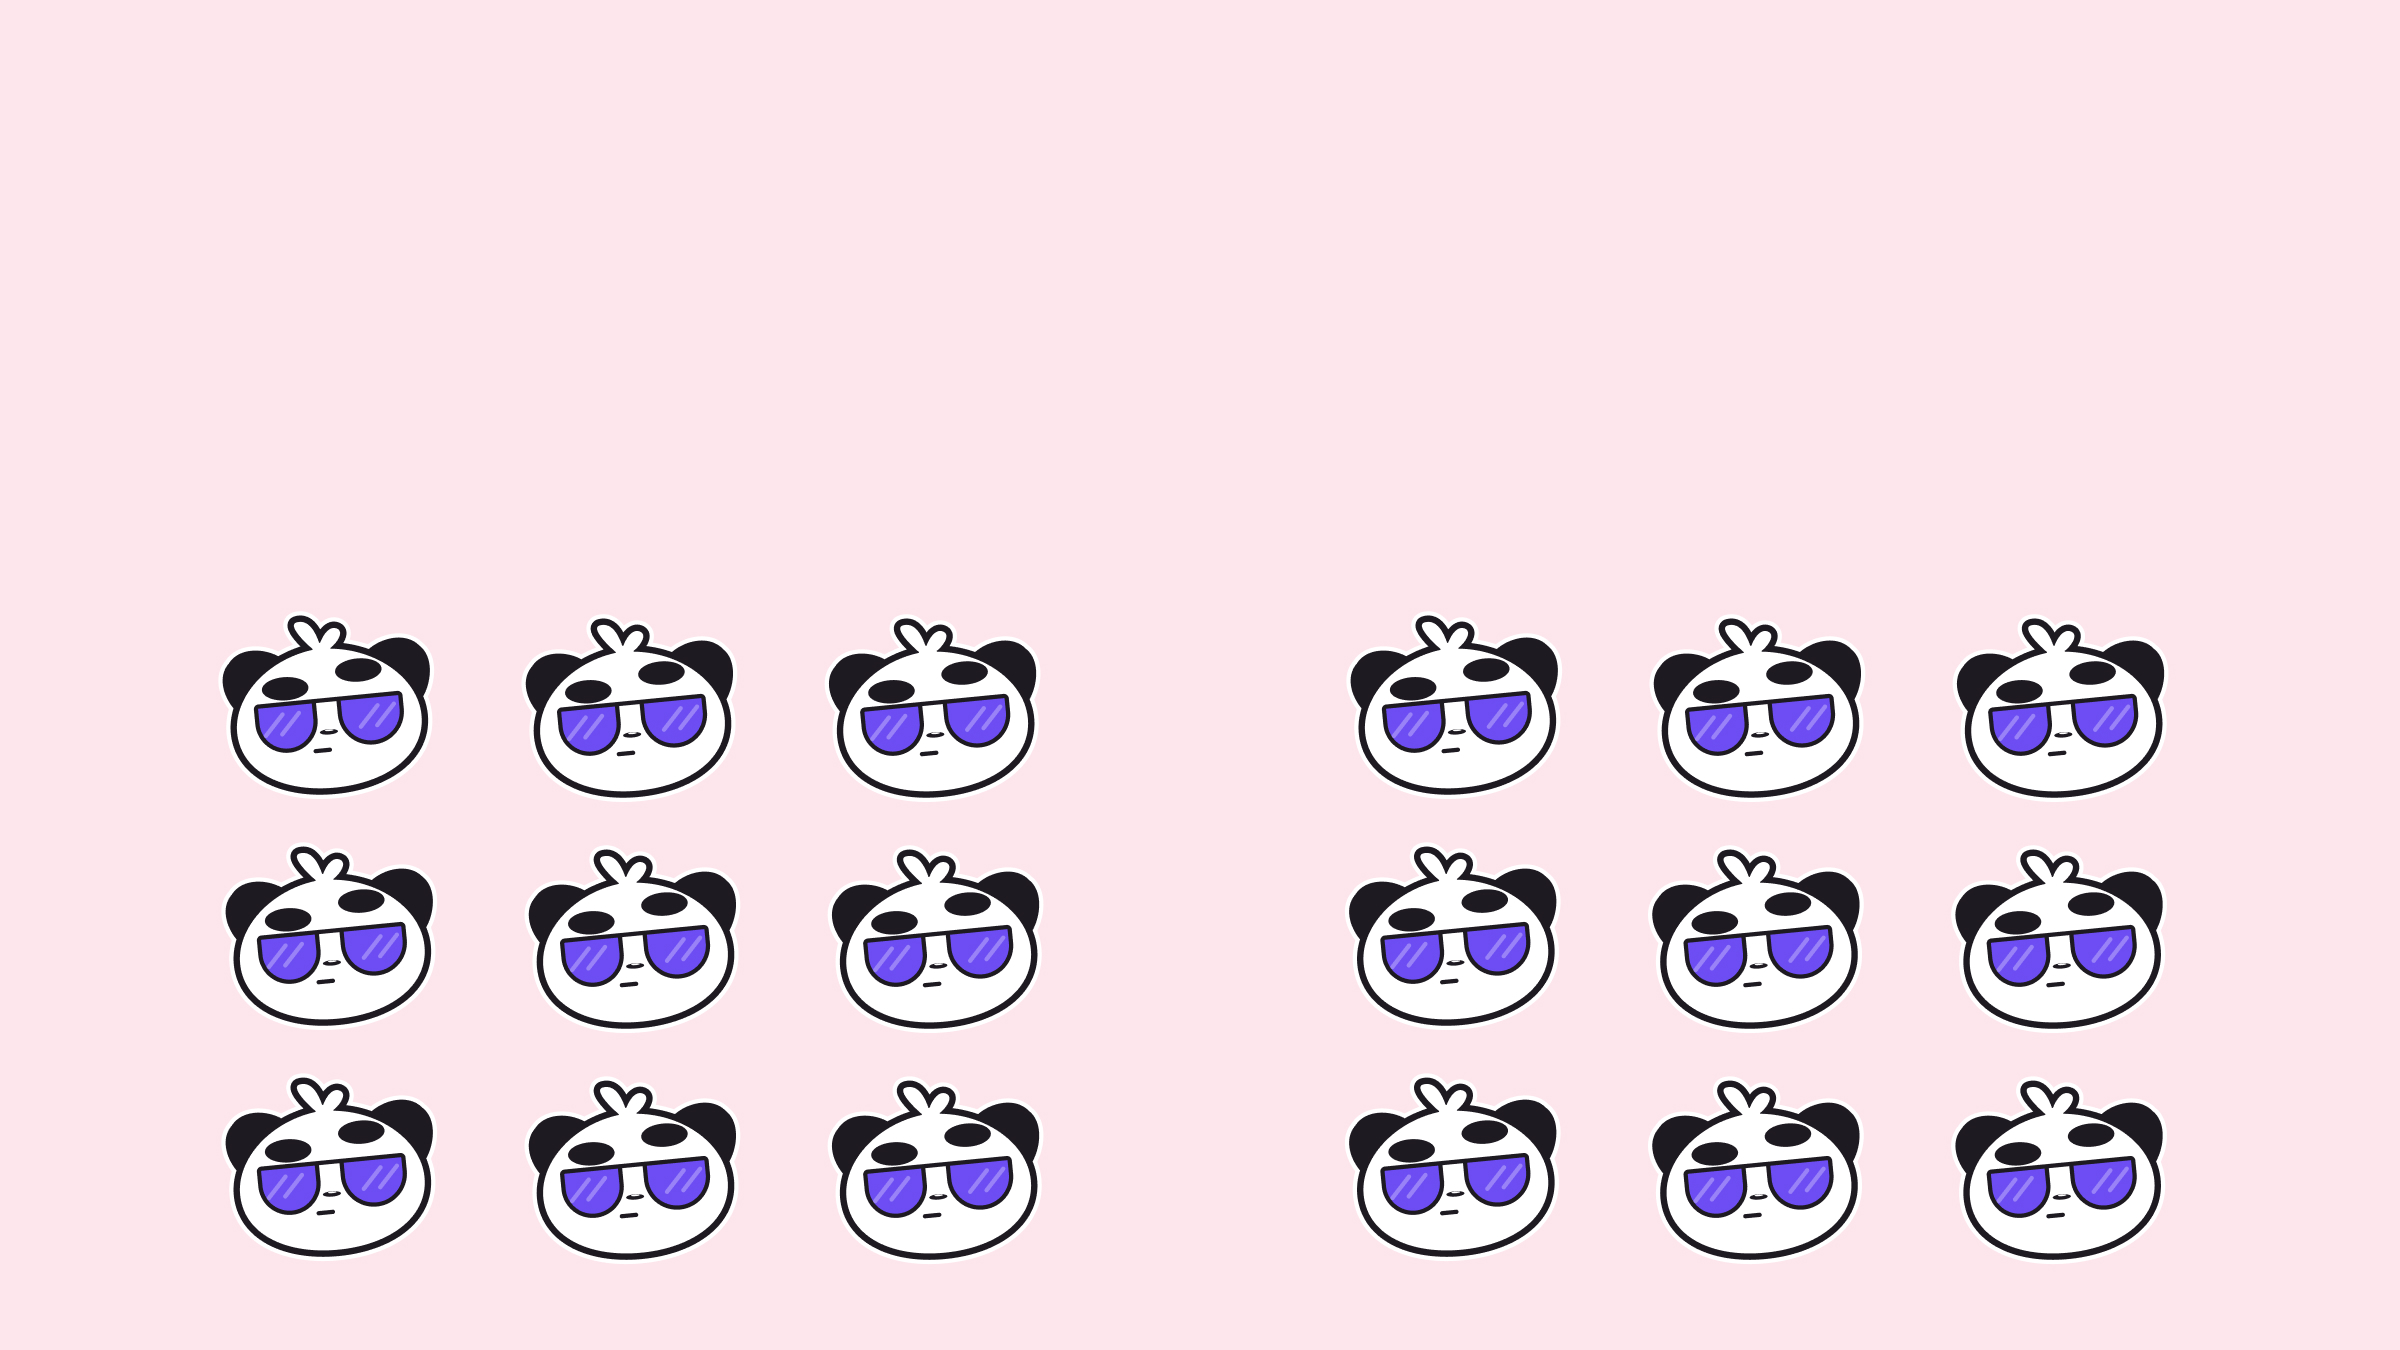 This picture shows two groups of vector pandas in purple glasses with 9 pandas per group. There is a small distance between the groups, and there is an indentation of the same size along the edges. There is also a large indentation on top, the background is pastel pink.